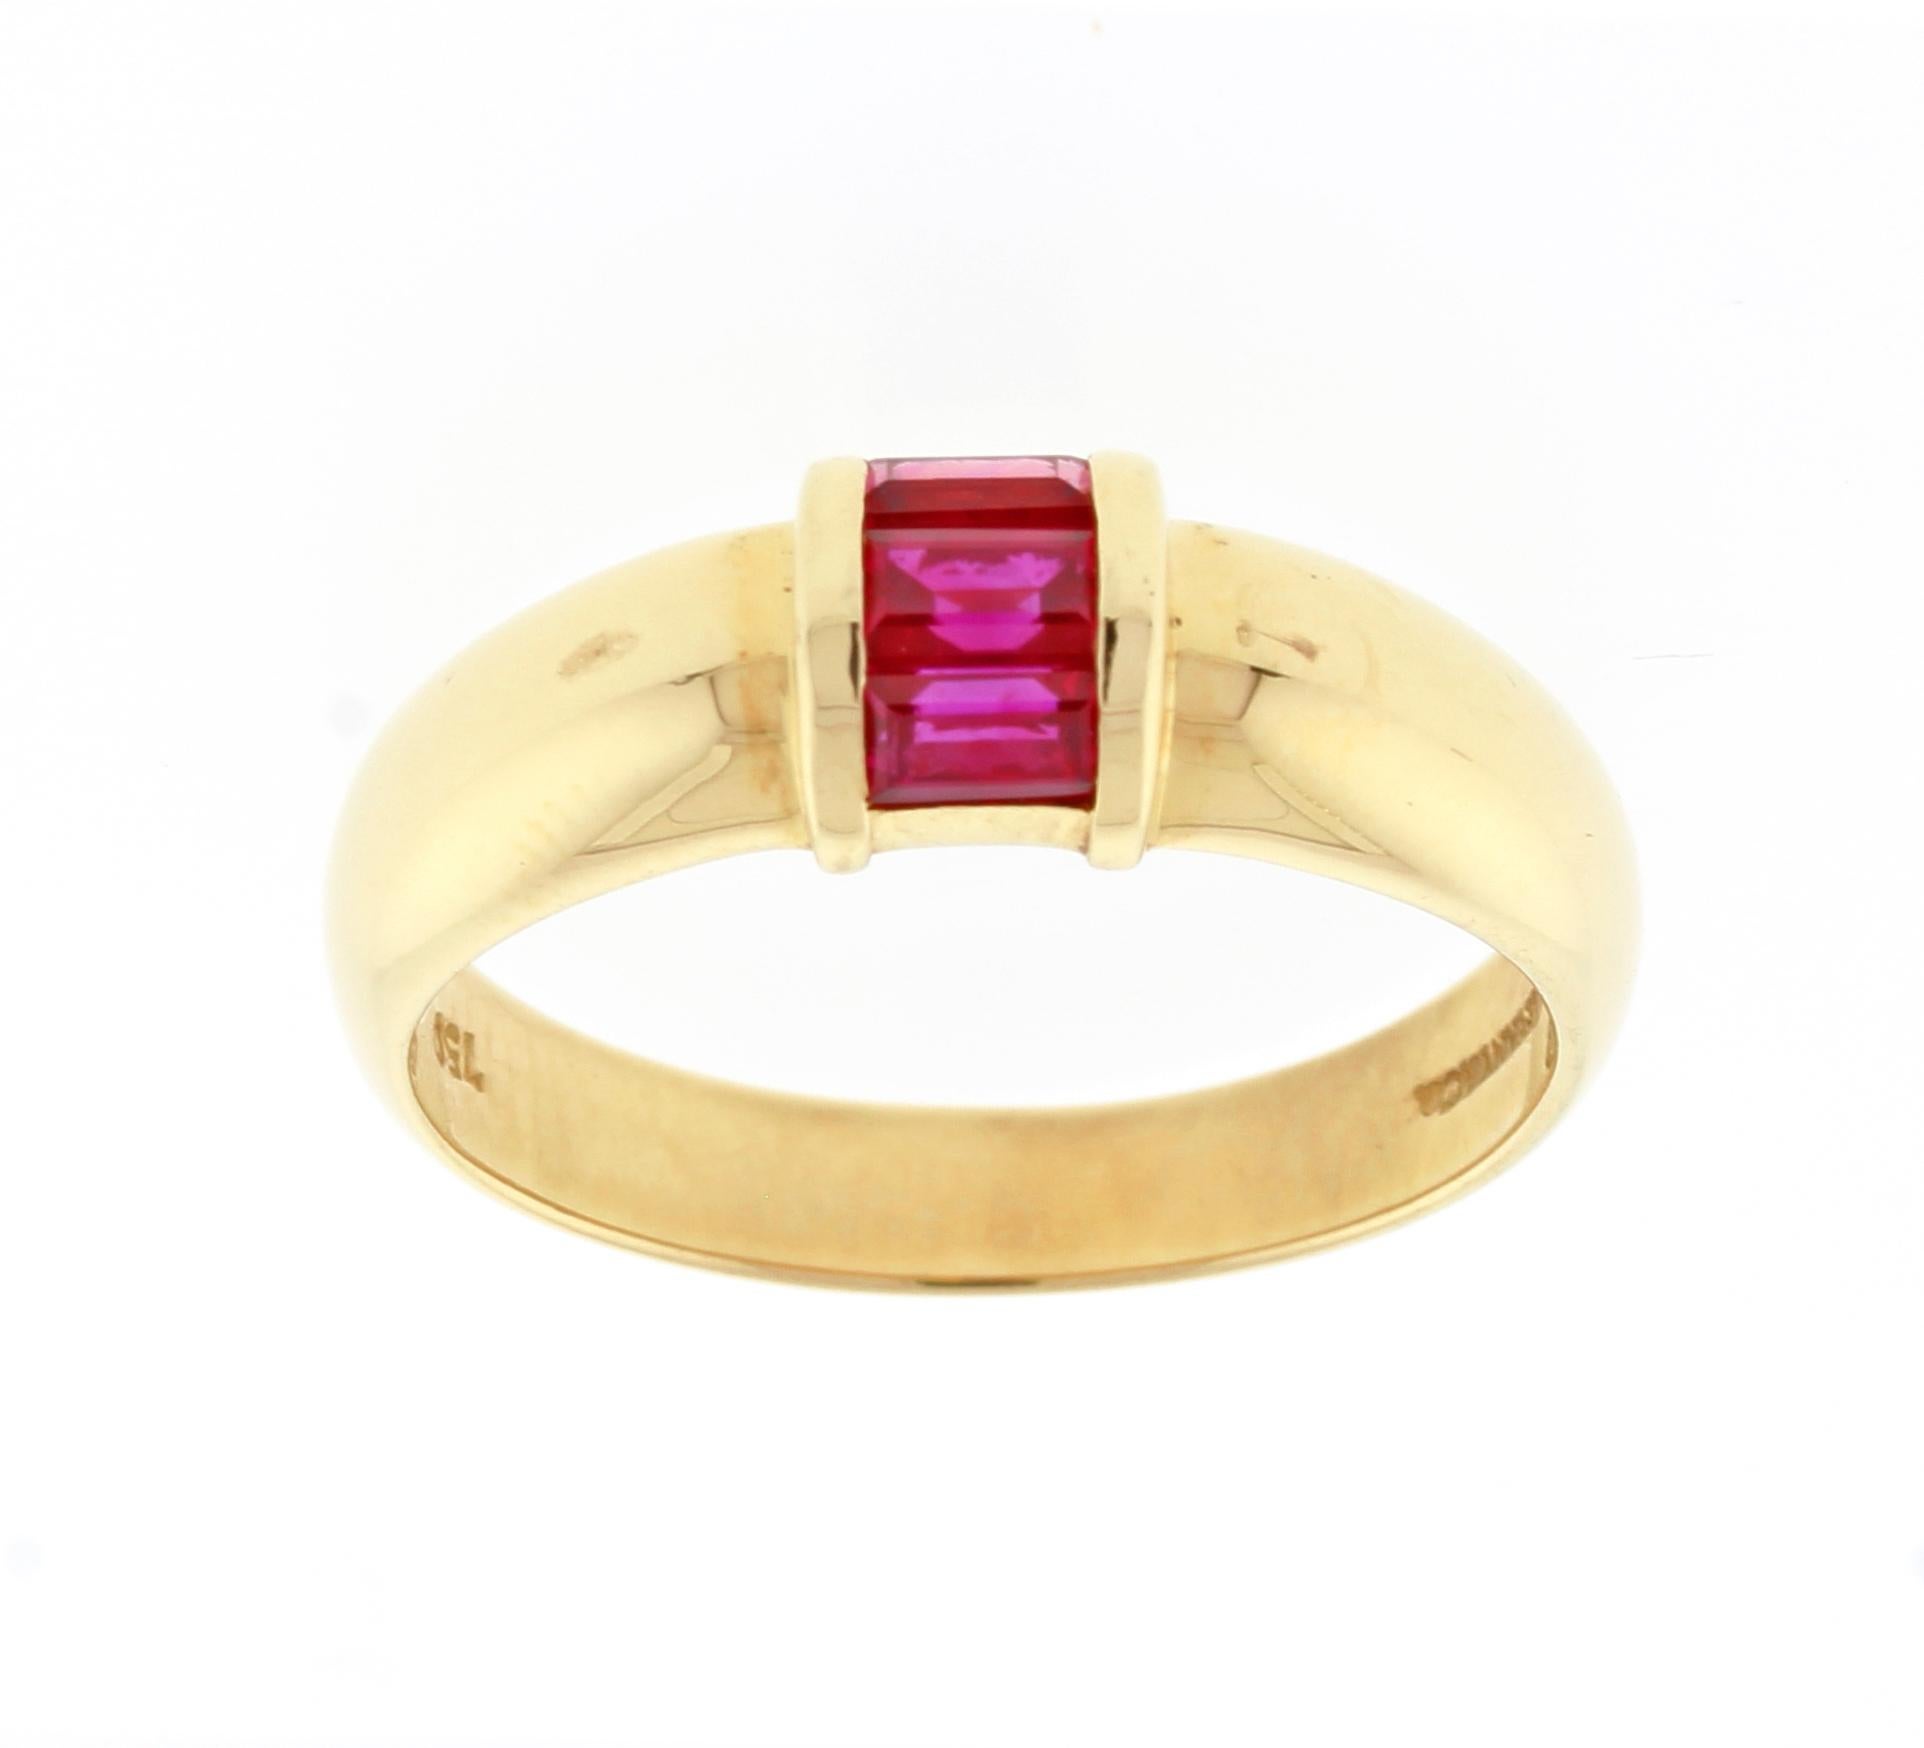 From Tiffany & Co.  a sleek band featuring three baguette rubies.
♦ Designer: Tiffany & Co.
♦ Metal: 18 karat
♦ 4.3 grams
♦ 3 Rubies = .30 carats
♦ Circa 2000 
♦ Size 7 Resizable
♦ Packaging: Tiffany pouch
♦ Condition: Excellent , pre-owned
♦ Price: